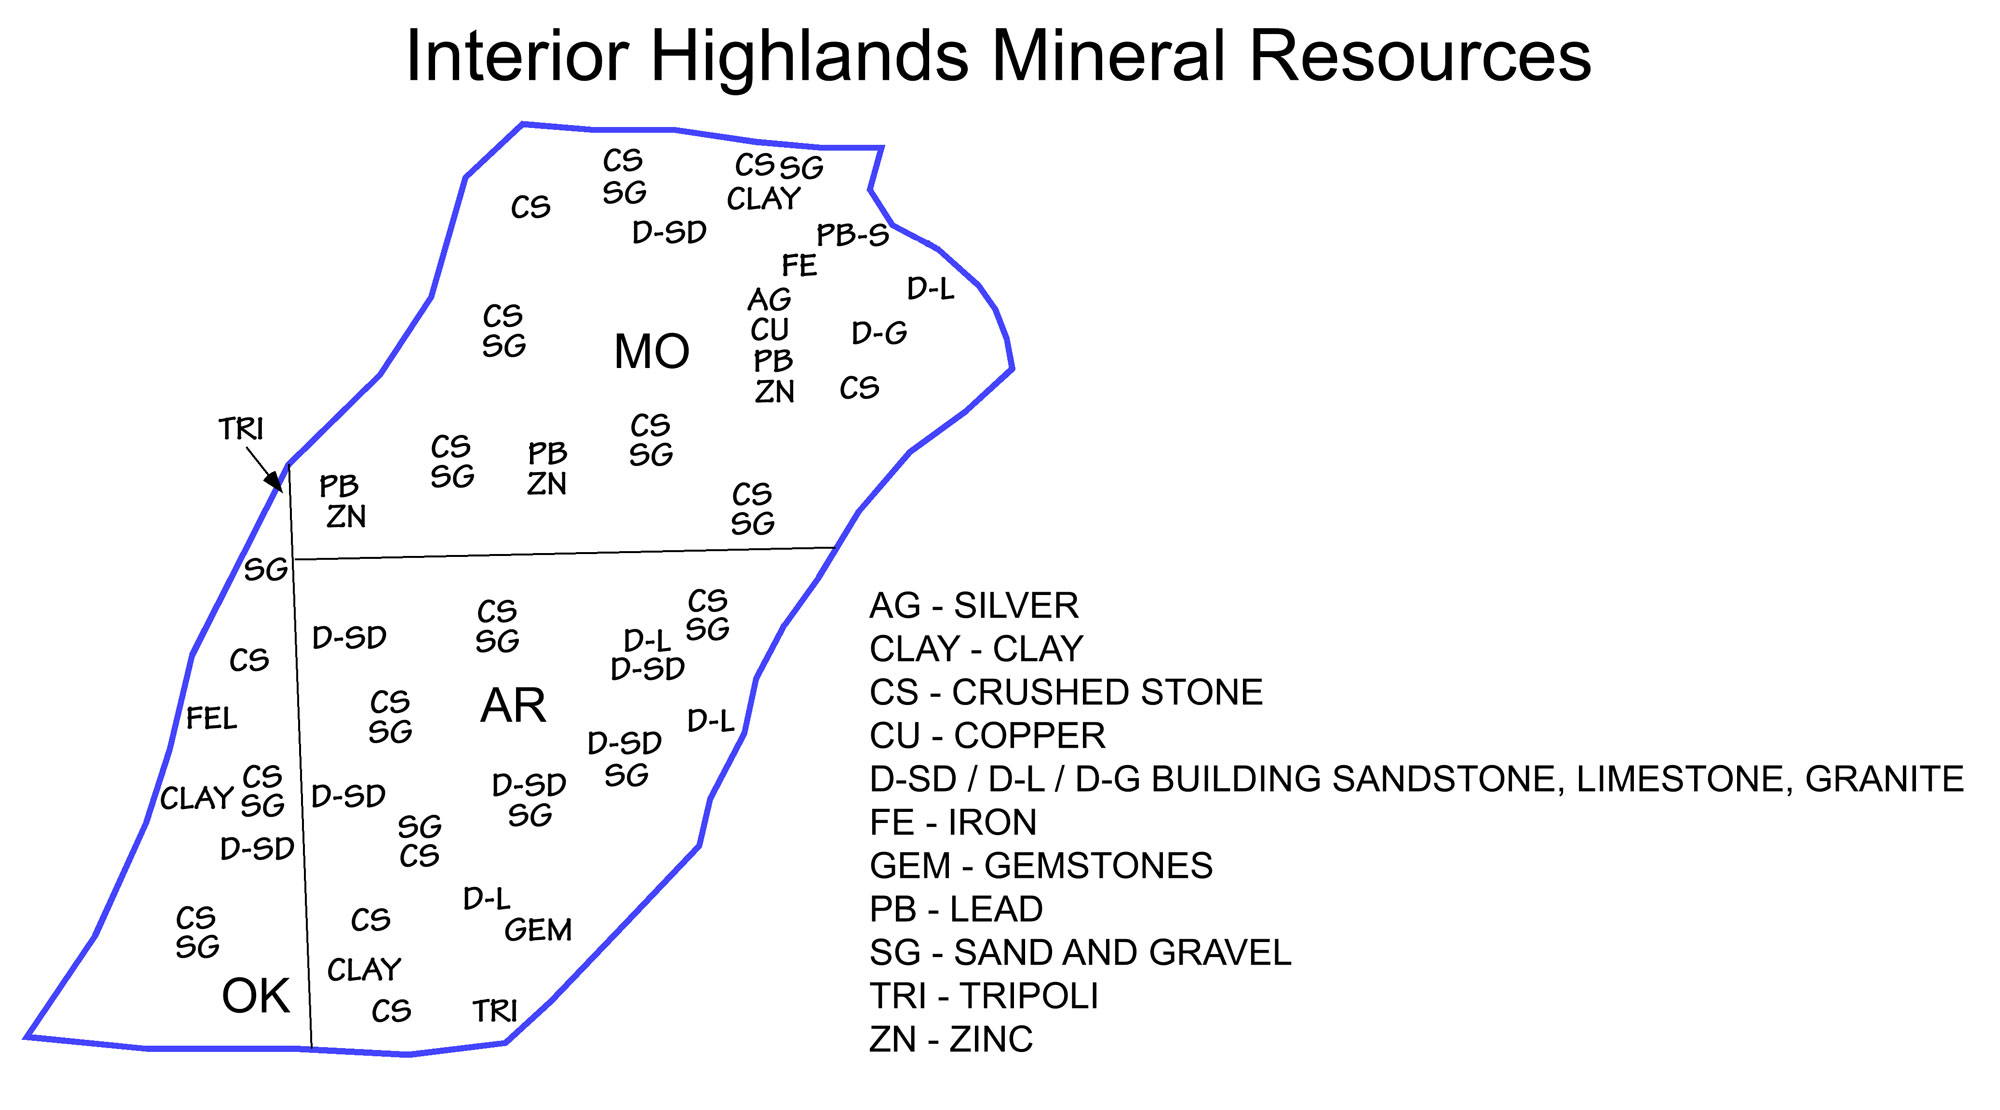 Map showing the locations of different types of mineral resources in the Interior Highlands region of the South-Central United States.